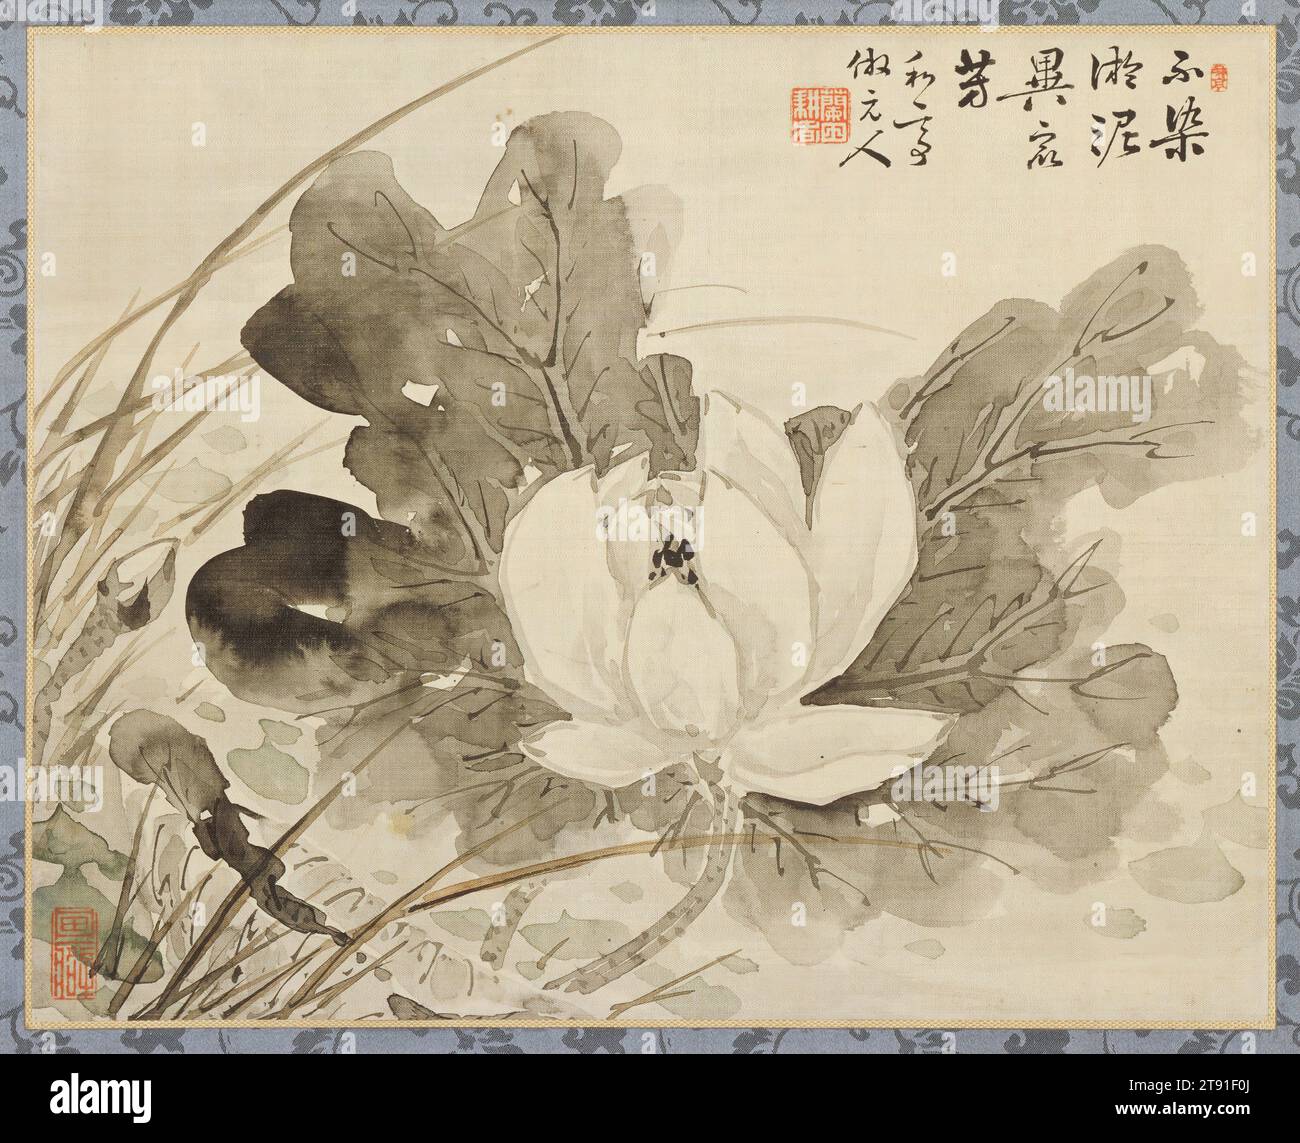 Lotus in Bloom, 19th century, Taki Katei, Japanese, 1830 - 1901, 10 1/16 x 12 7/16 in. (25.56 x 31.59 cm) (image), Ink on satin, Japan, 19th century, Taki Katei specialized in Chinese literati style painting which he learned from Japanese masters Araki Kankai and O_oka Umpo_ but, also from Chinese scholar painters living in Nagasaki. The small scale of this painting, its seasonal and symbolic theme make it appropriate for use in the tea ceremony. The lotus has long been a Buddhist emblem, representing the perfection and 'flowering' of the Buddha's teachings. Stock Photo